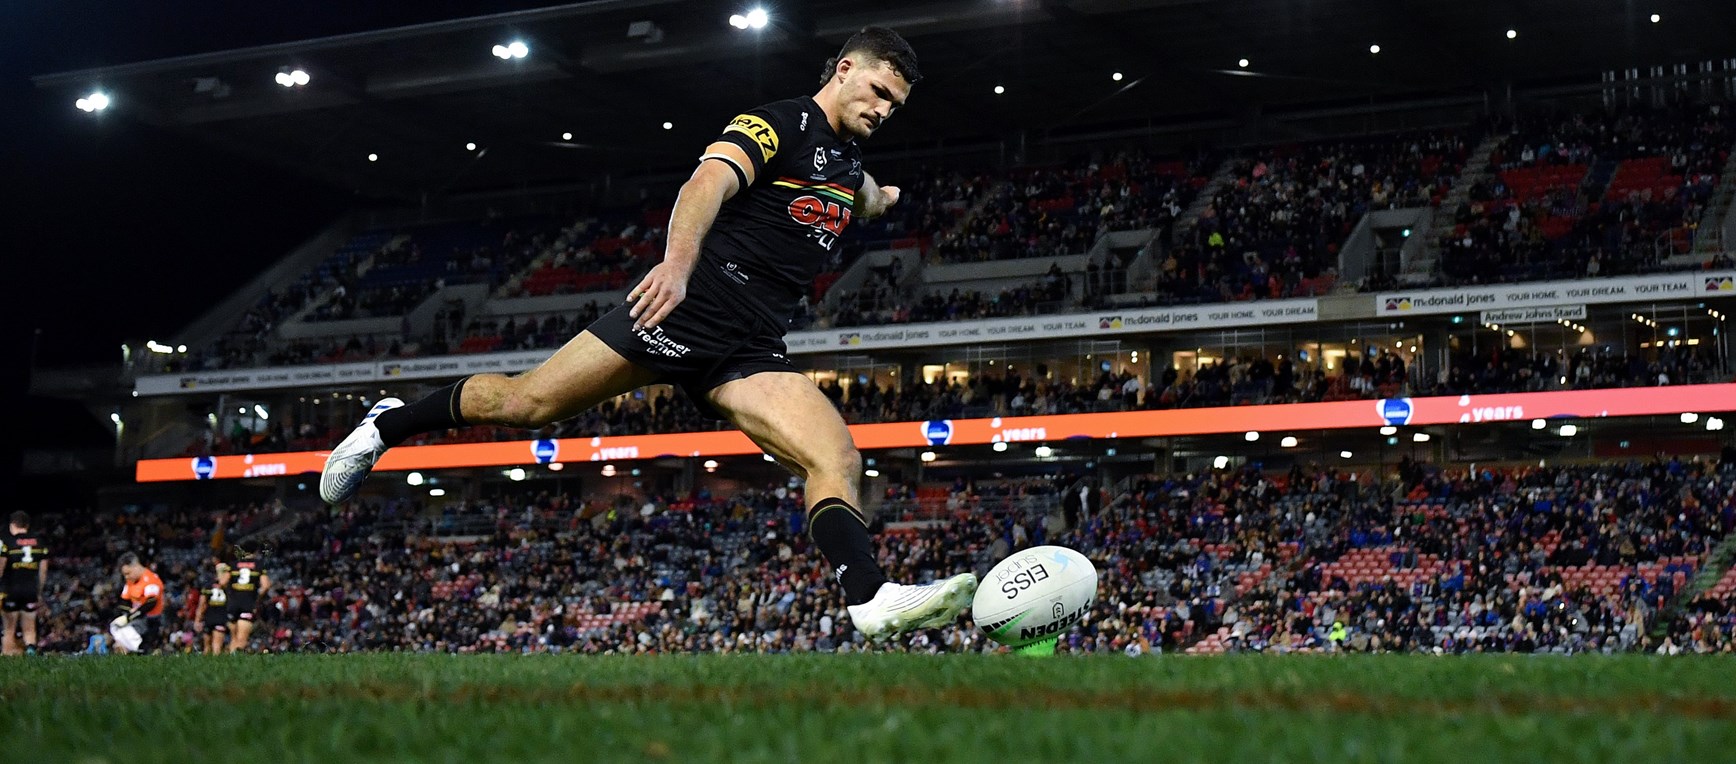 OAK Plus Gallery: Panthers v Knights